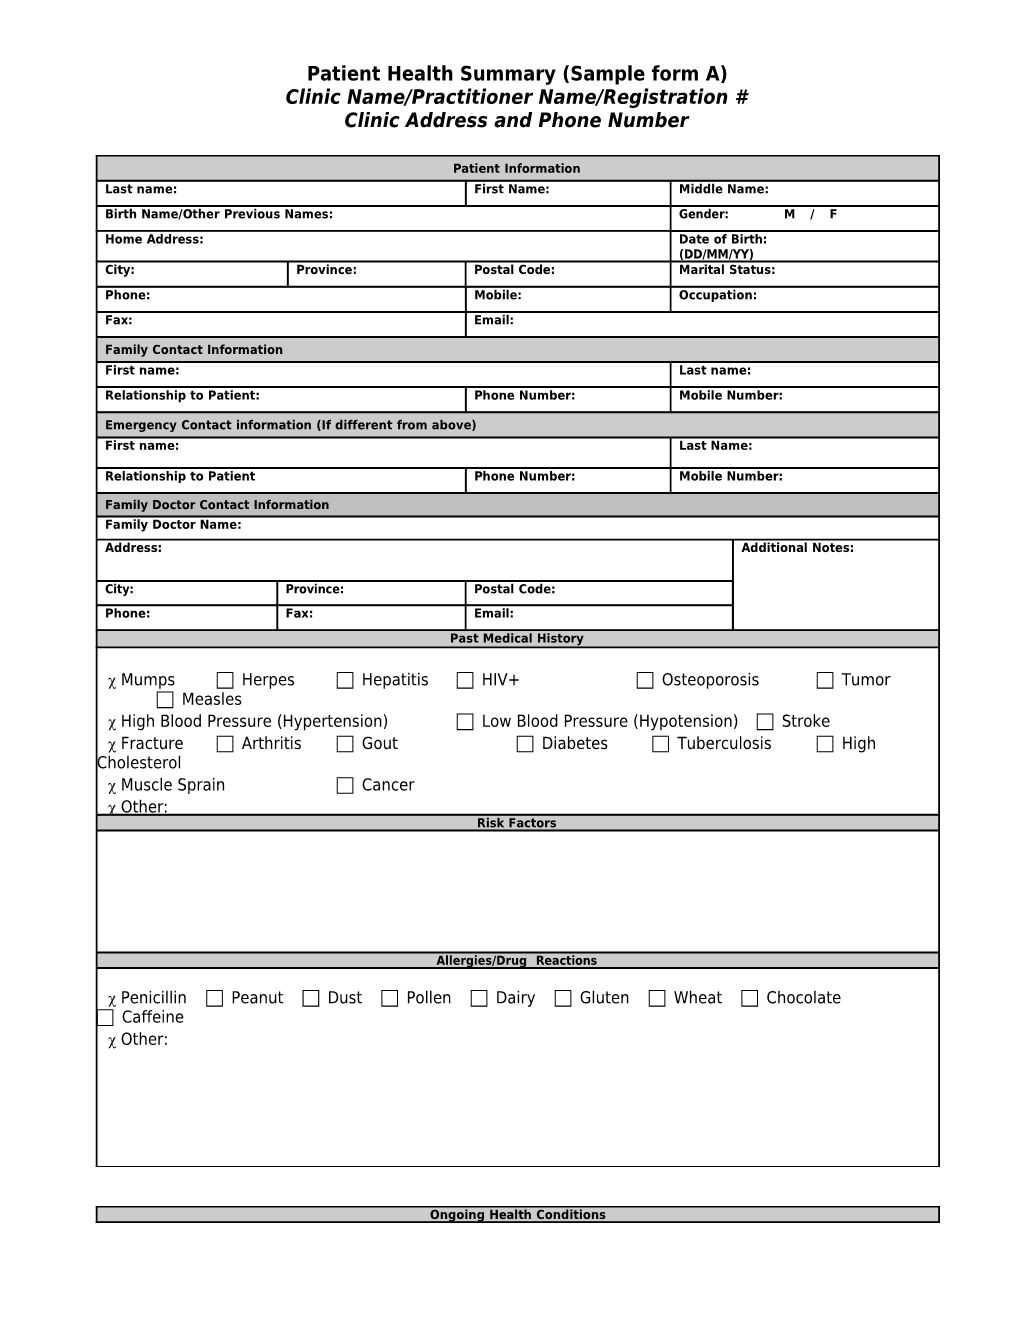 Patient Health Summary (Sample Form A)